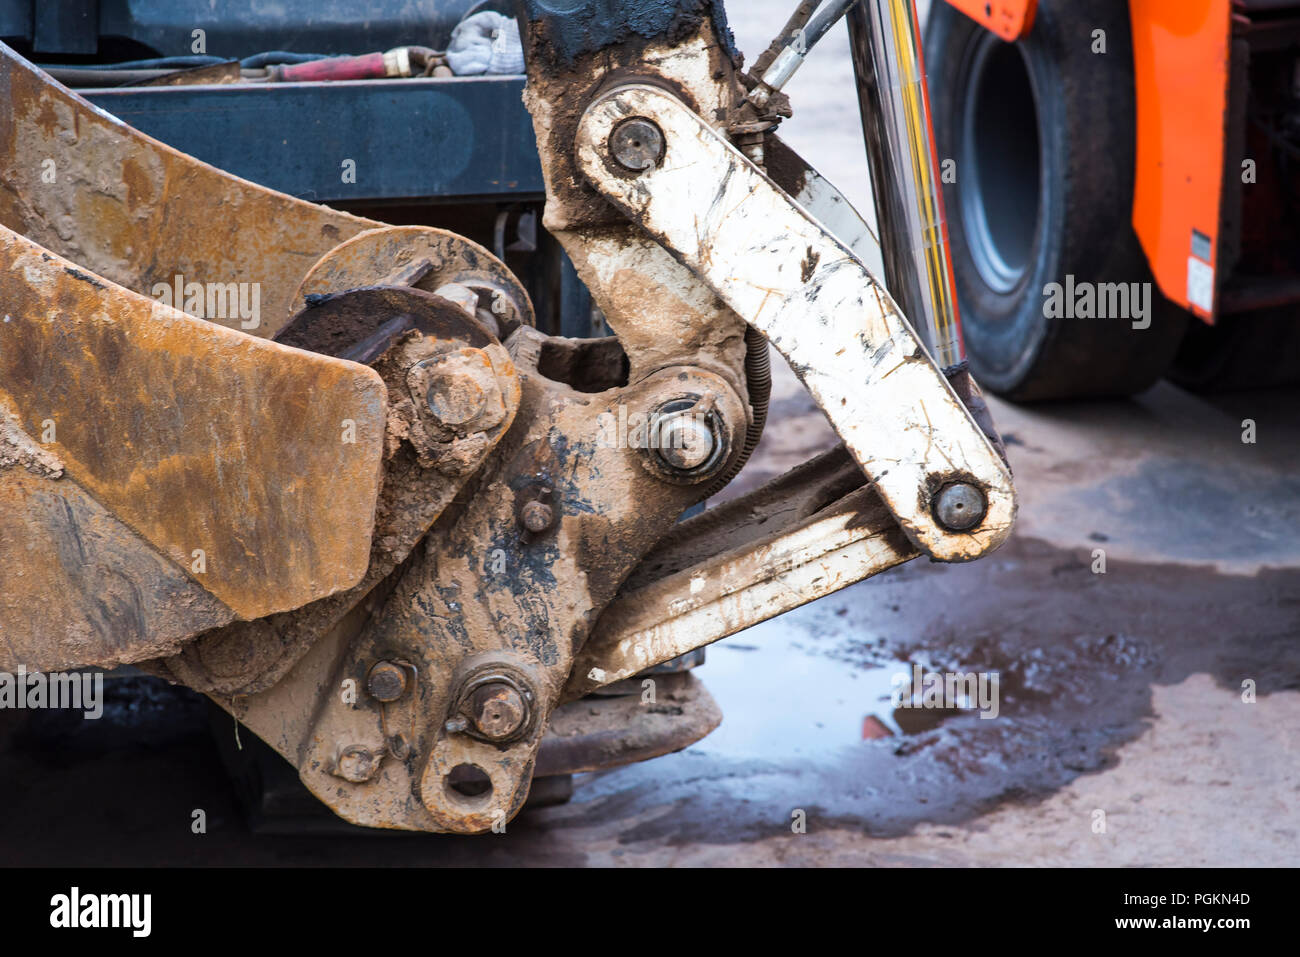 bulldozer, excavator close-up, heavy metal equipment with iron ladle and large wheels at work in the sand quarry, excavations of sand, earth and soil, industrial site, construction site Stock Photo